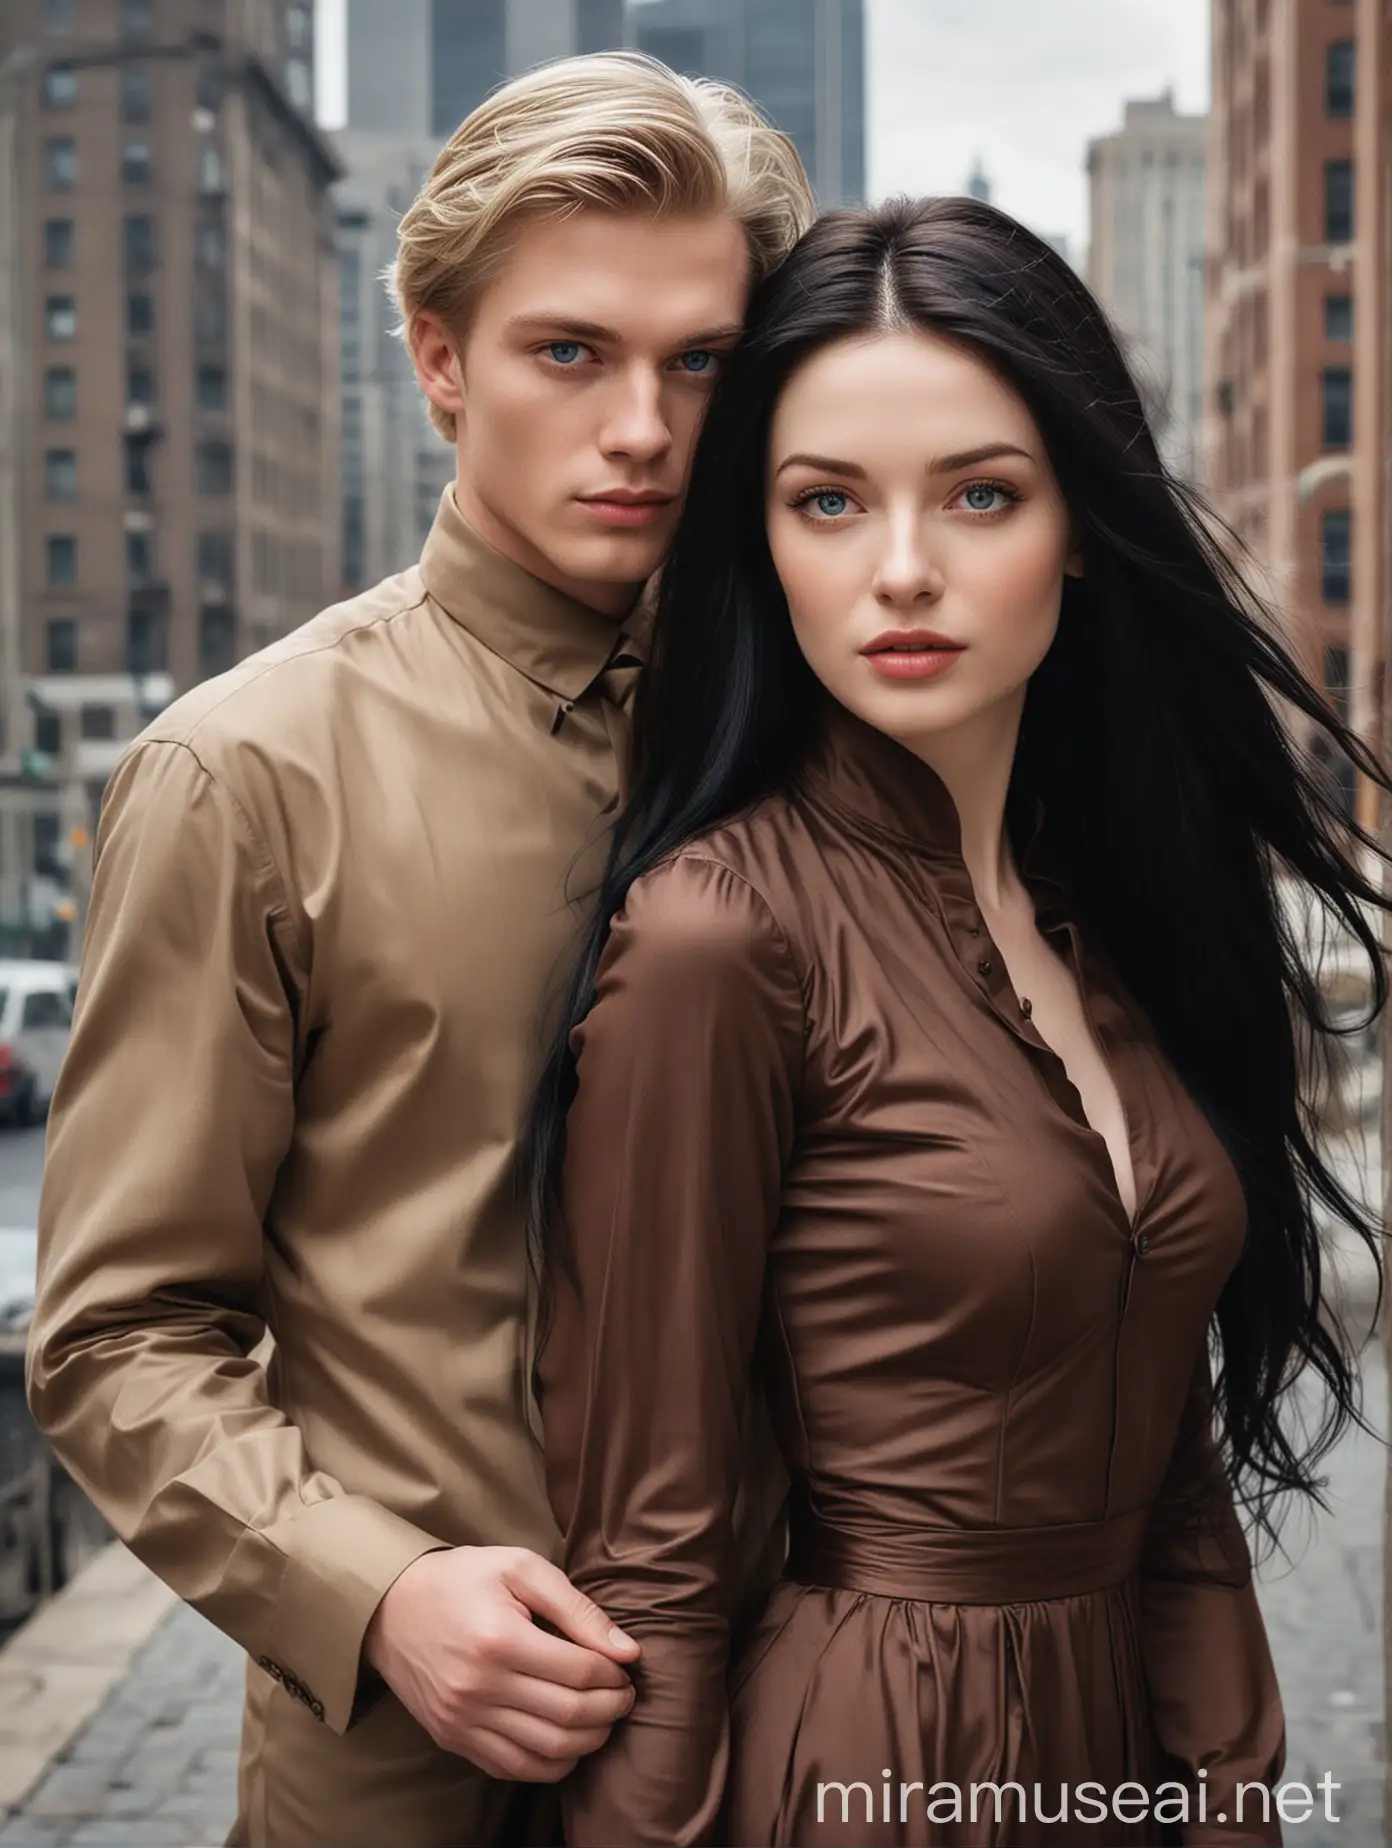 The subject of the portrait is a woman with white, pale skin and a flawless physique and a man that has pale flawless skin. The woman have long, lustrous black hair that shines brightly and the woman is wearing a captivating chocolate brown dress that highlights her hourglass shaped body while the man on her side is wearing business attire and the man should have short regulation-cut blonde hair. The image should prominently highlight their blue eyes while ensuring the eye and hair color remain distinct. The background should be tall buildings in the island.